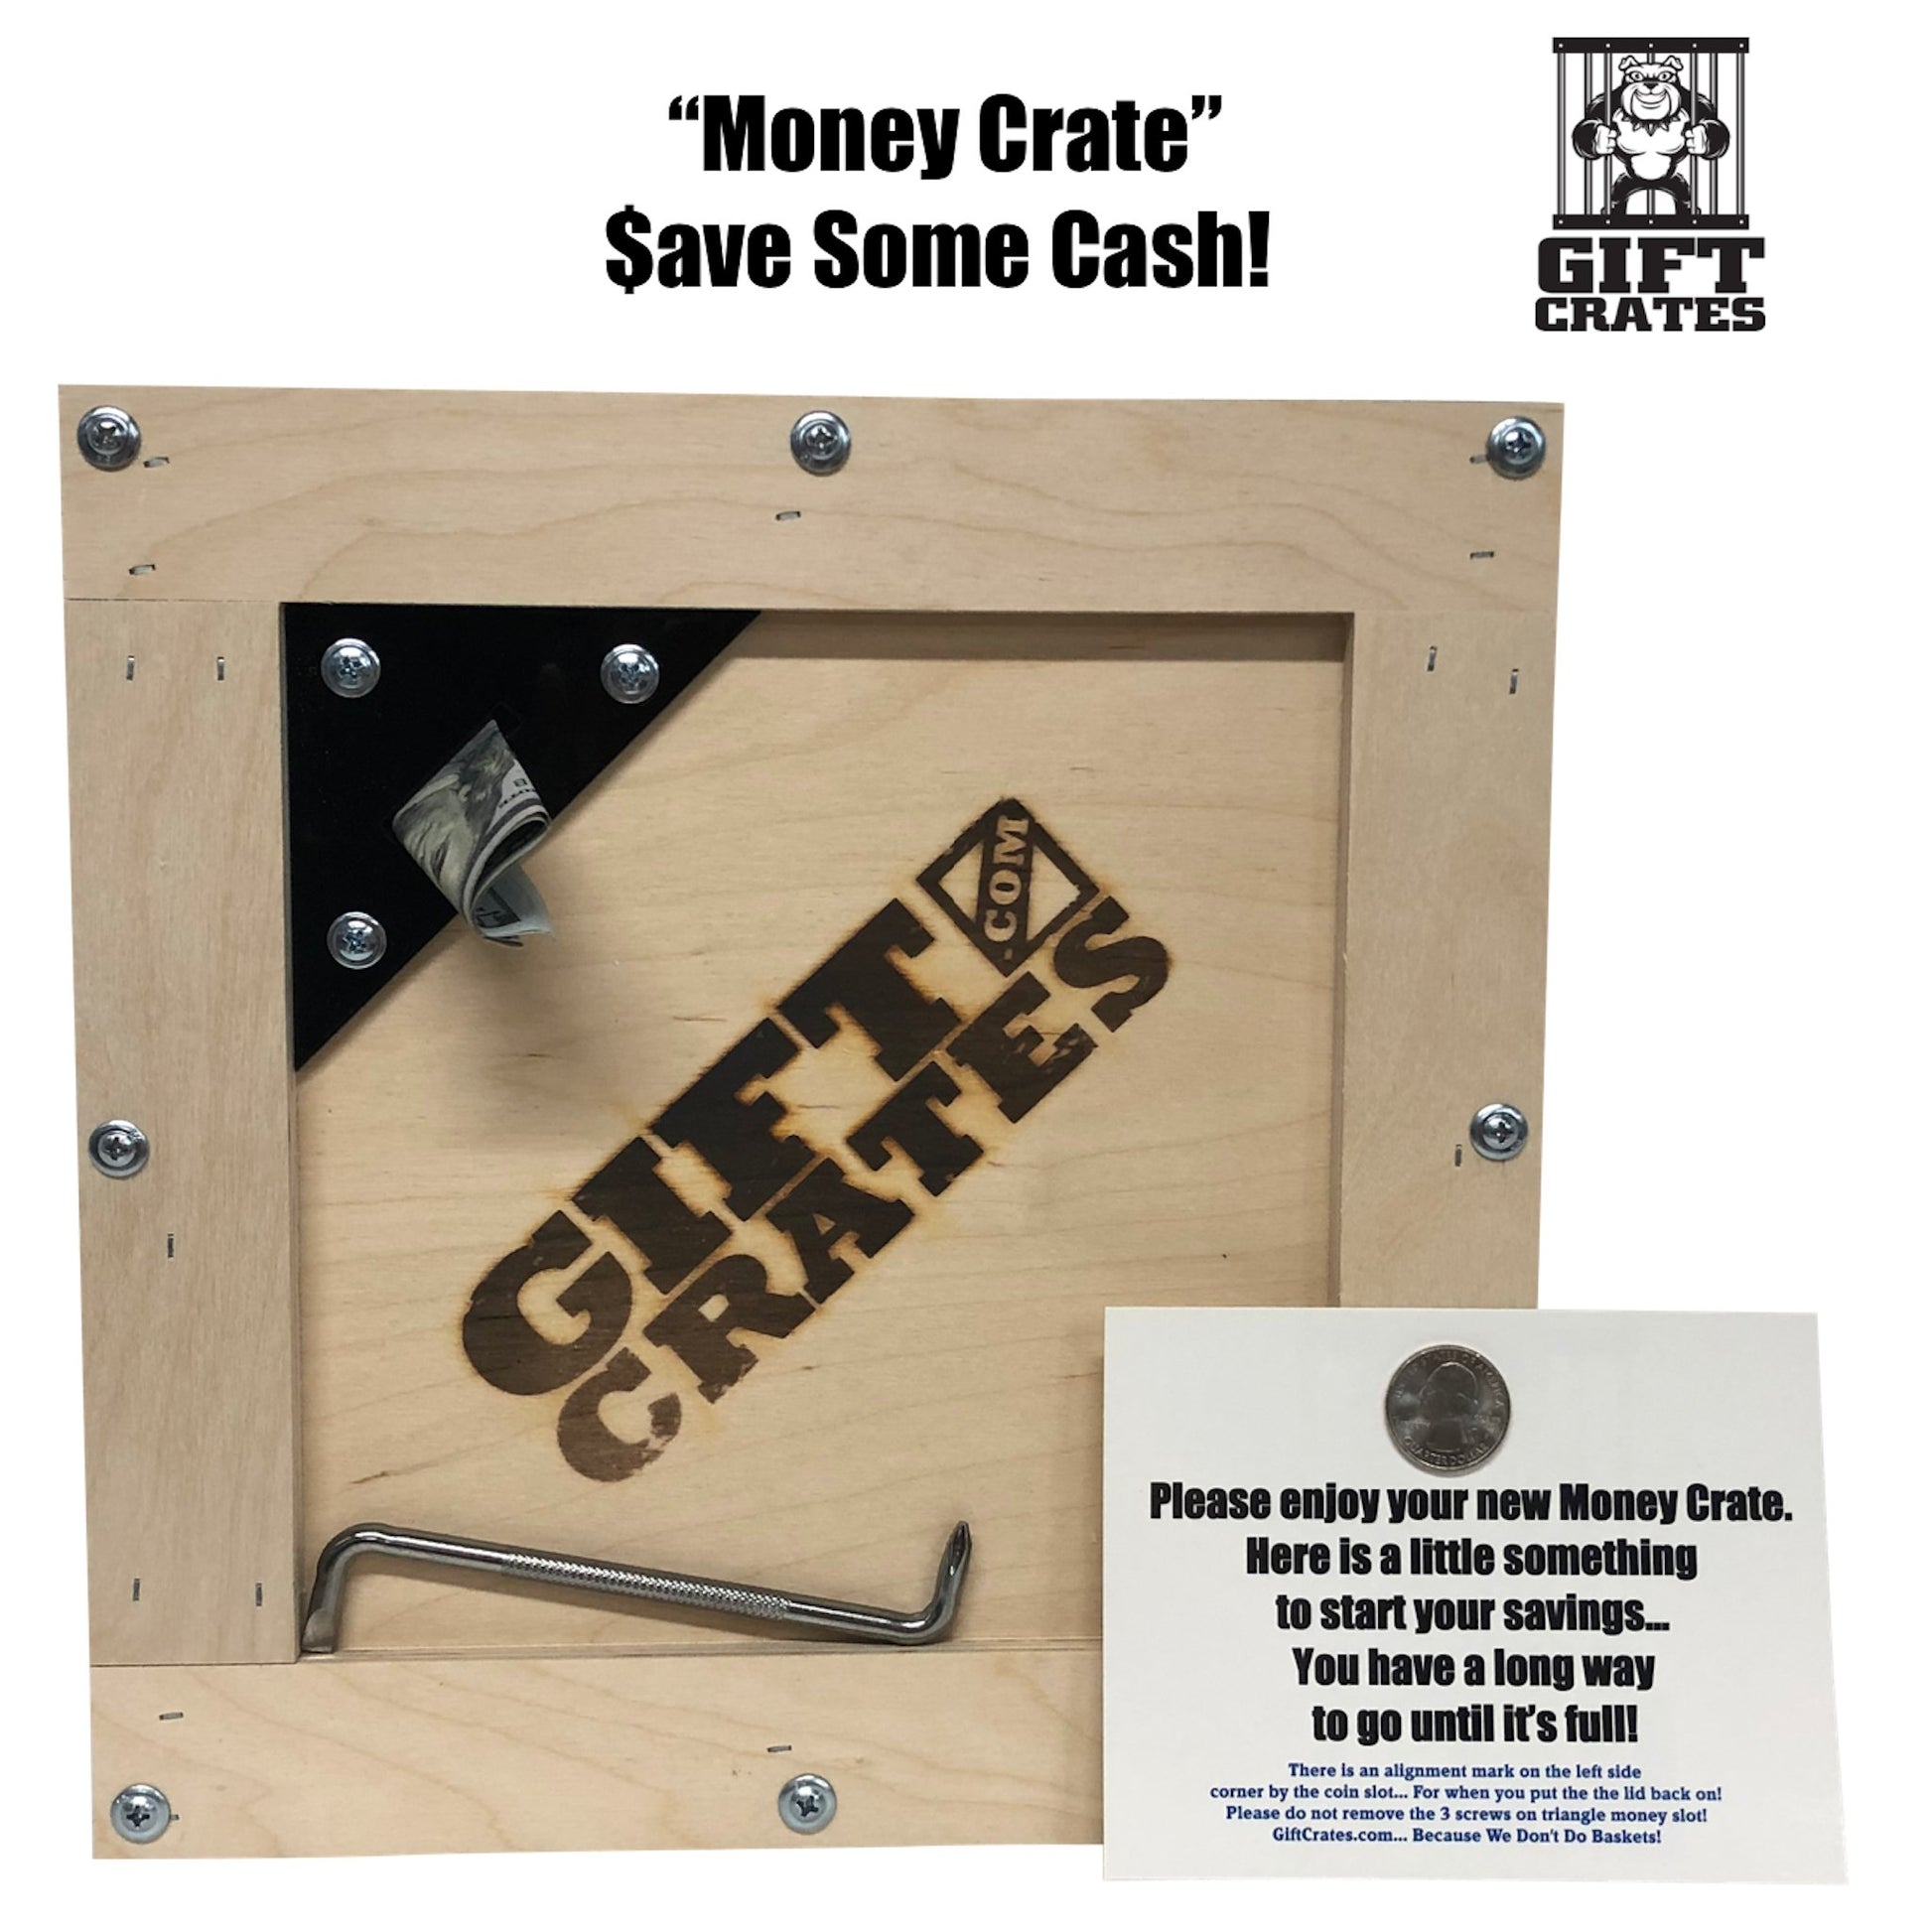 Clean Shave Crate - Gift Crates